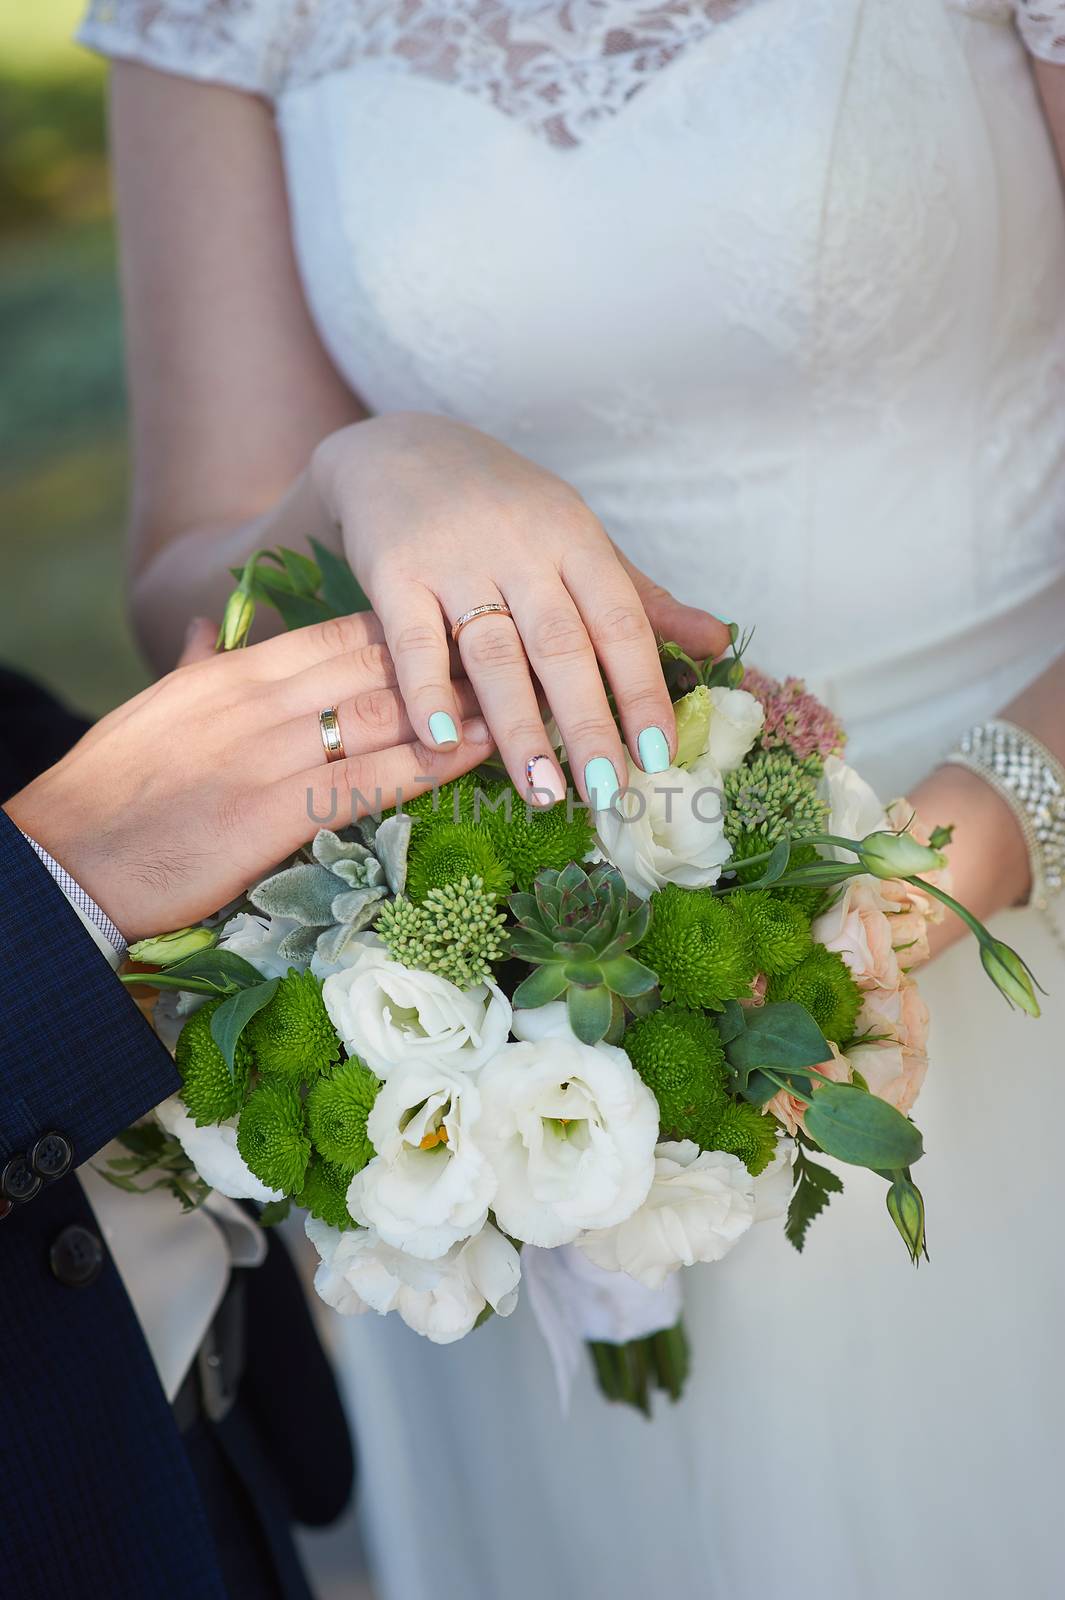 hands of the bride and groom with rings for wedding bouquet.